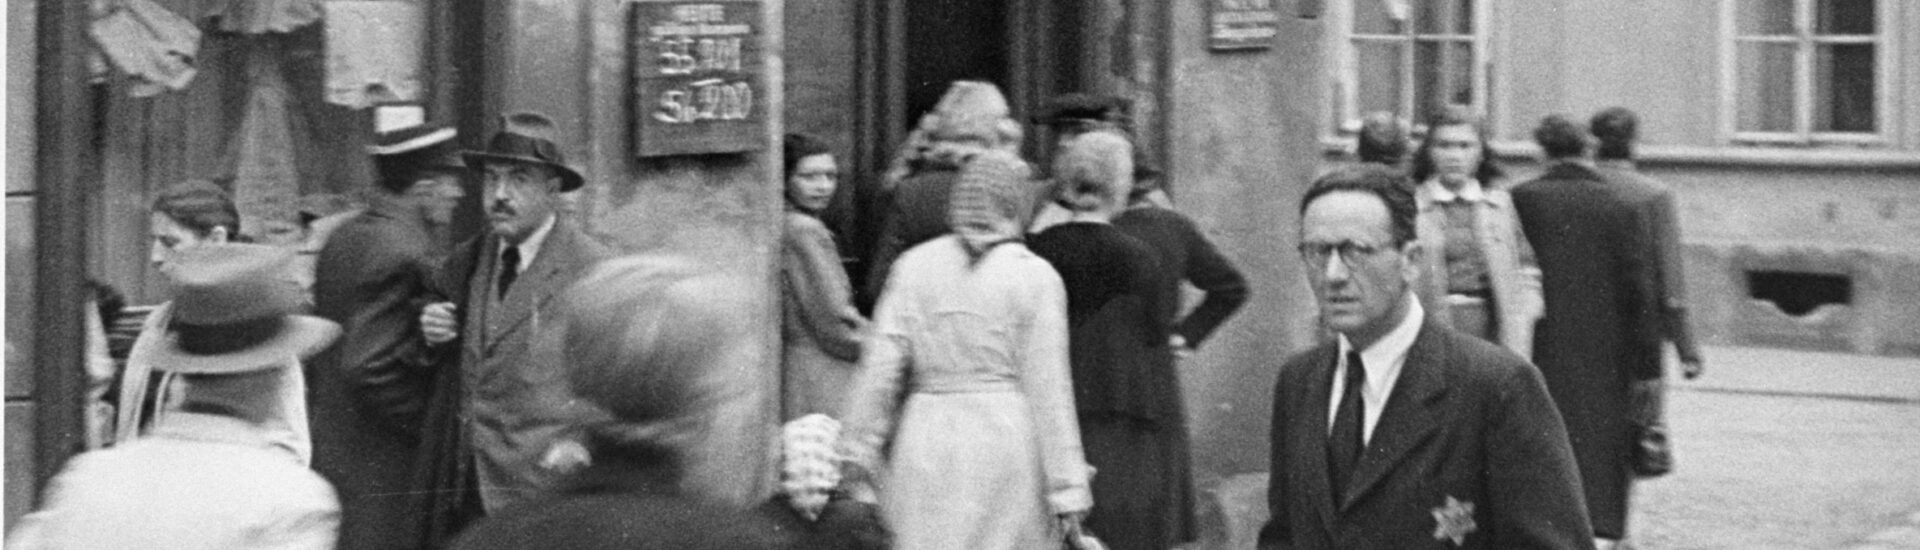 The Last Ghetto: An Everyday History of Theresienstadt